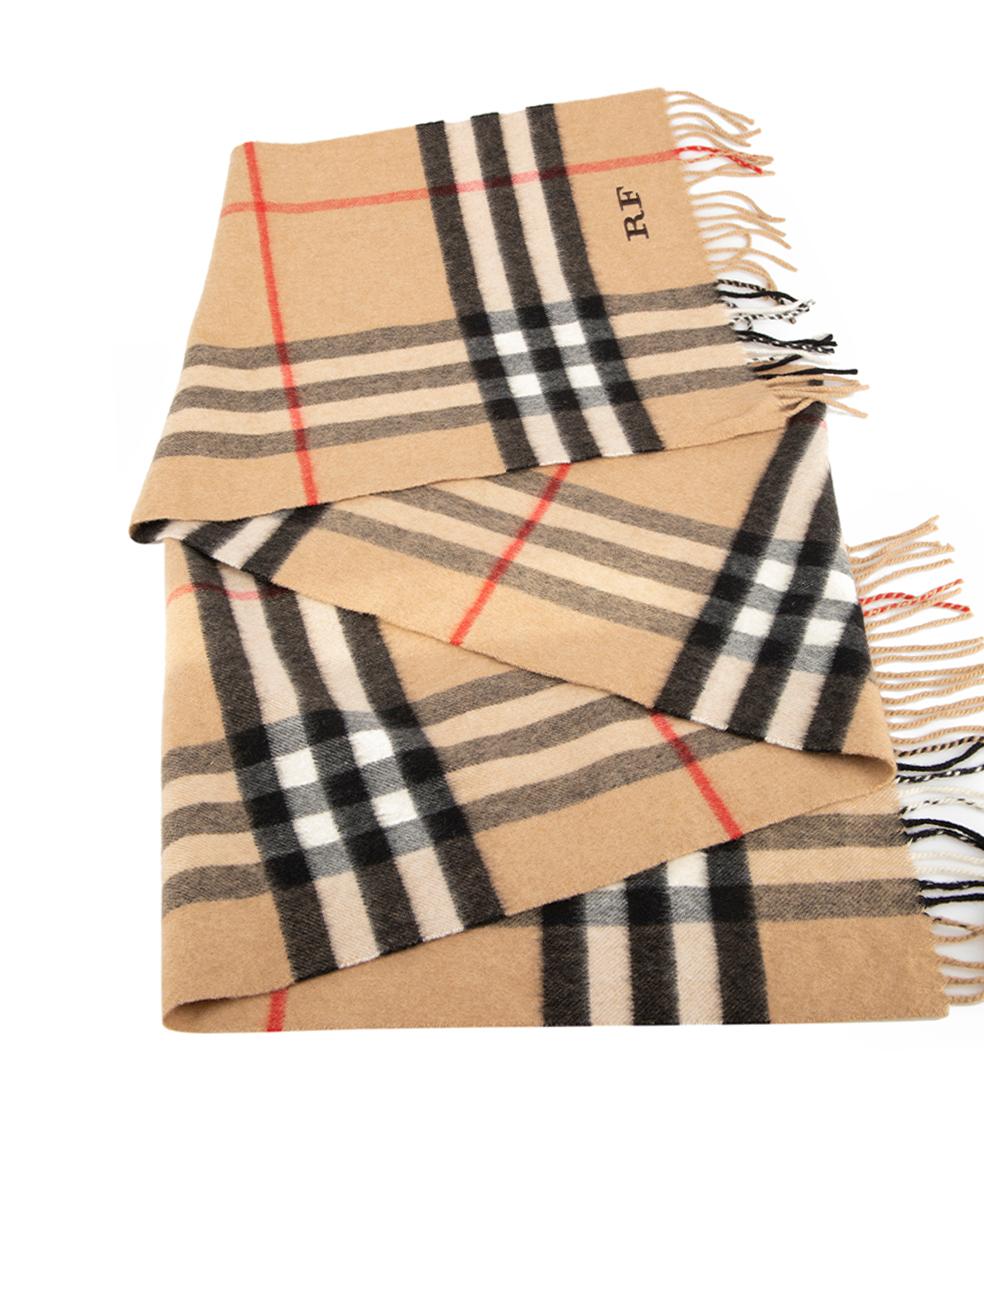 CONDITION is Very good. Hardly any visible wear to scarf is evident on this used Burberry designer resale item. 
 
 Details
  Brown
 Cashmere
 Scarf
 Signature Burberry nova check pattern
 Fringing hemline
 RF initialised embroidery
 
 
 Made in